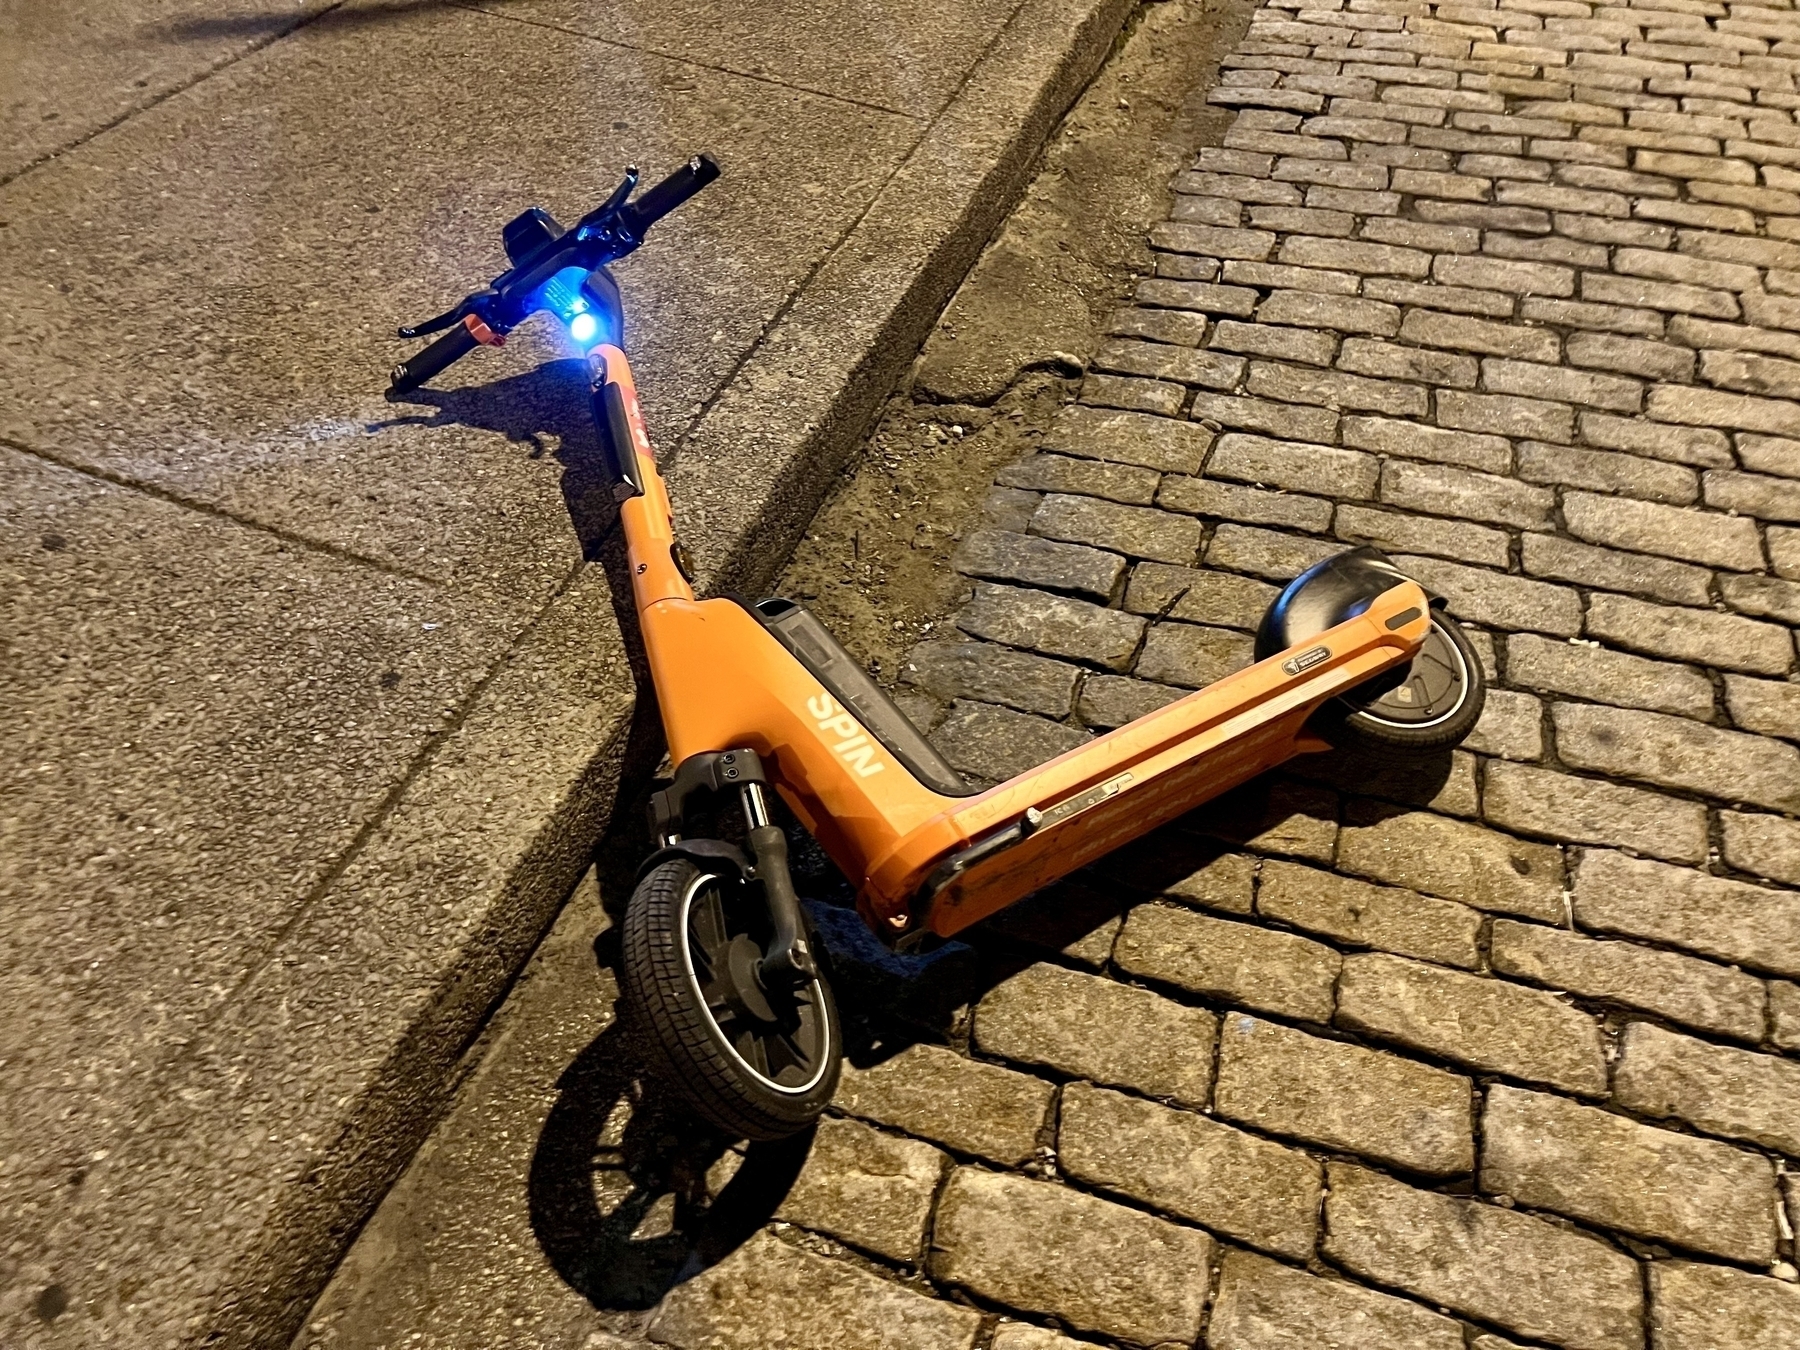 Broken electric scooter, lying on a brick road, with its headlight still on.